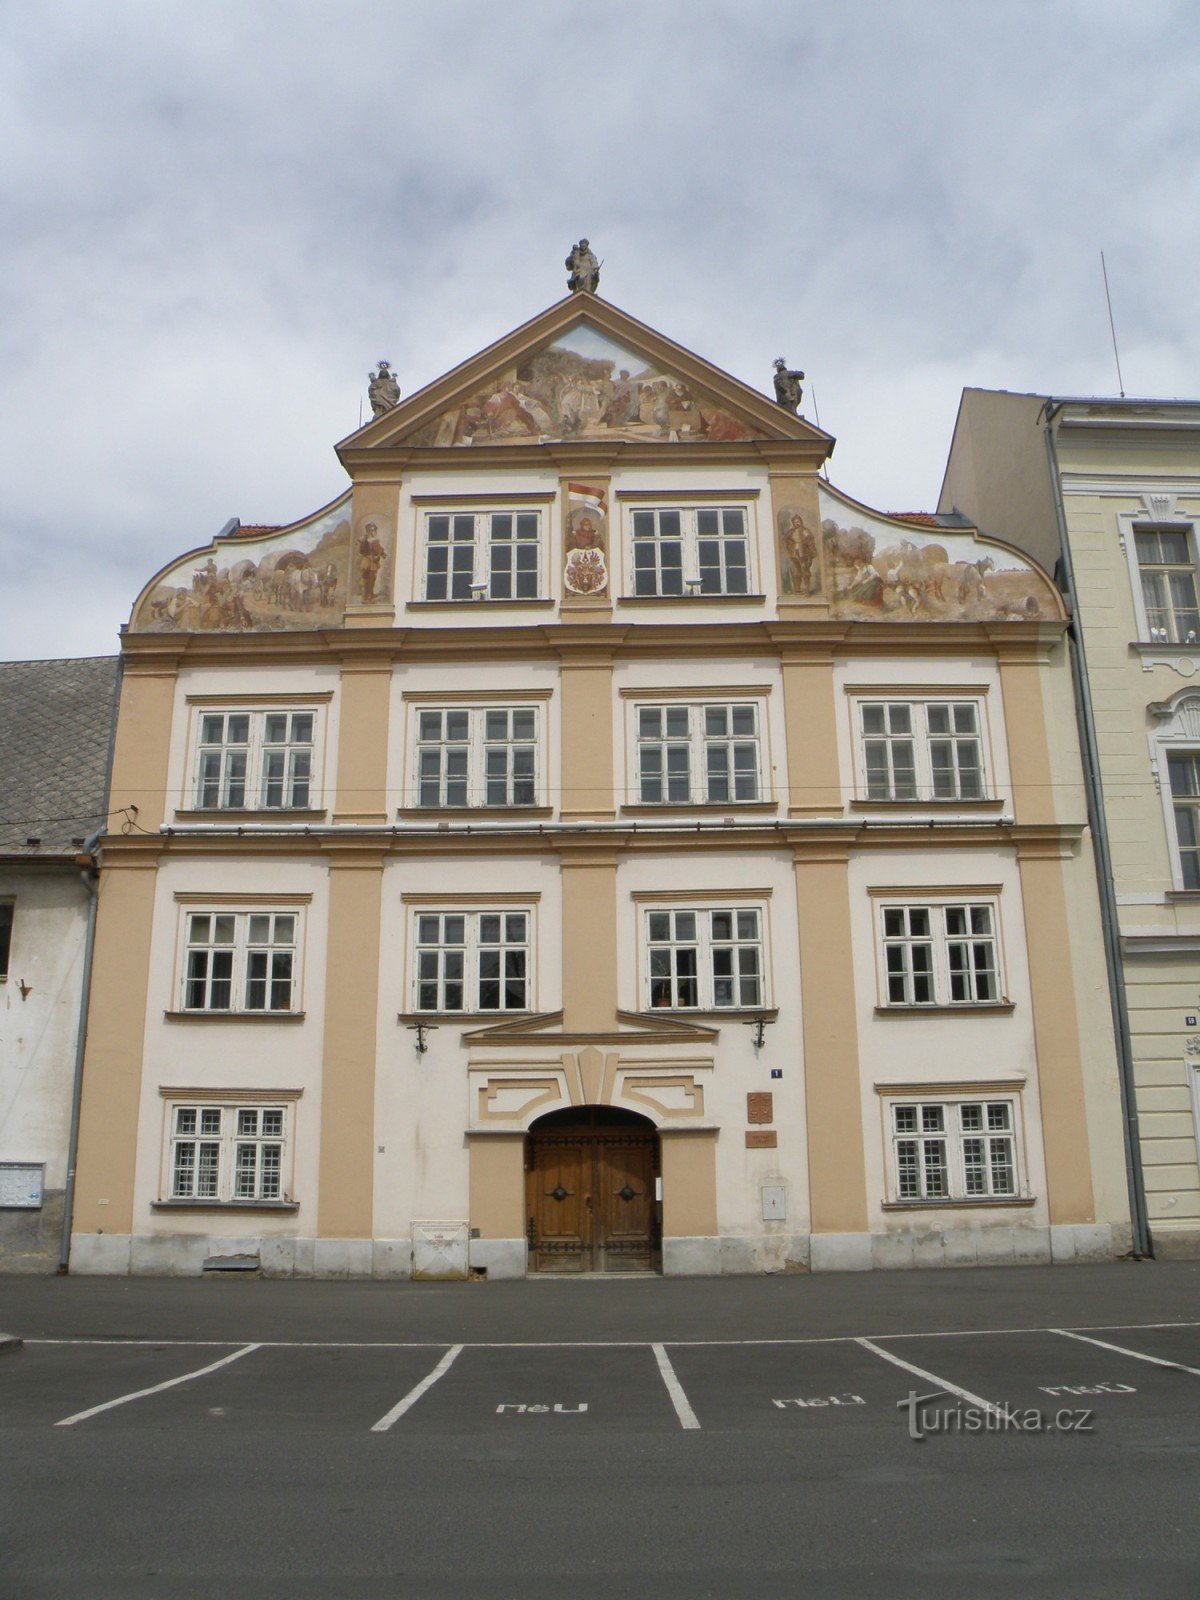 early baroque town hall